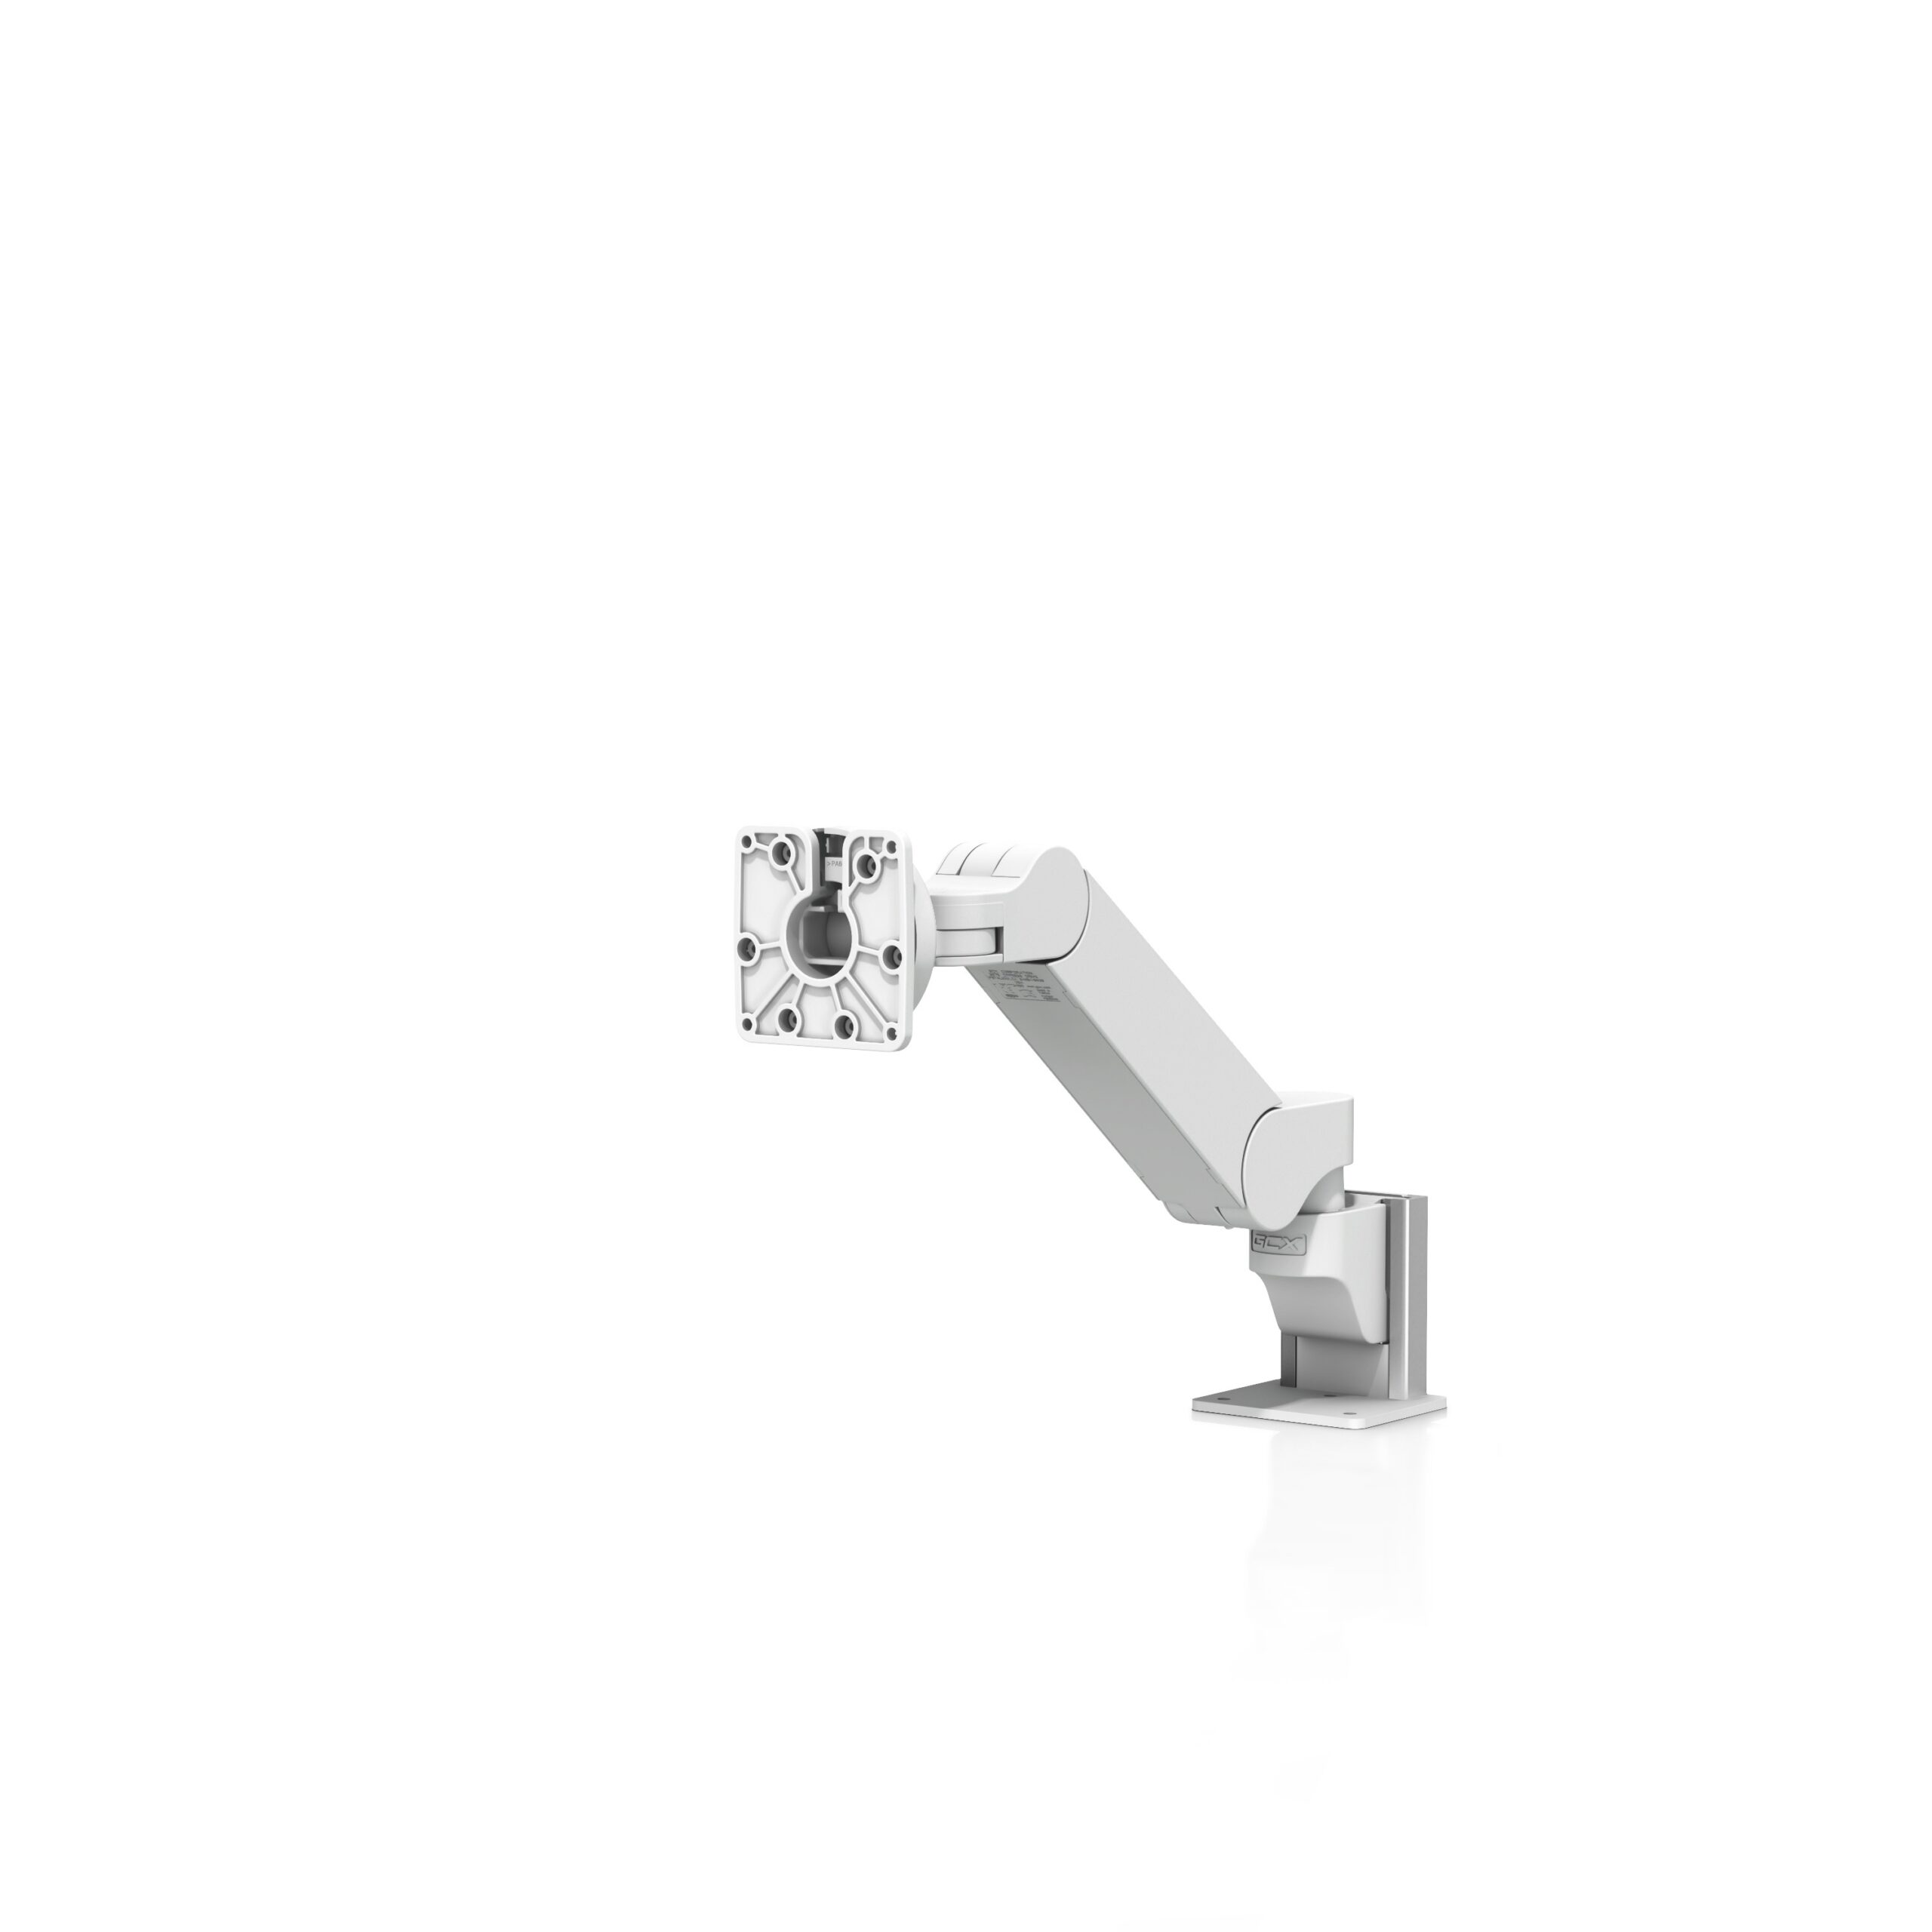 Countertop Mount for VHM-T Variable Height Arm for Tablets Unloaded